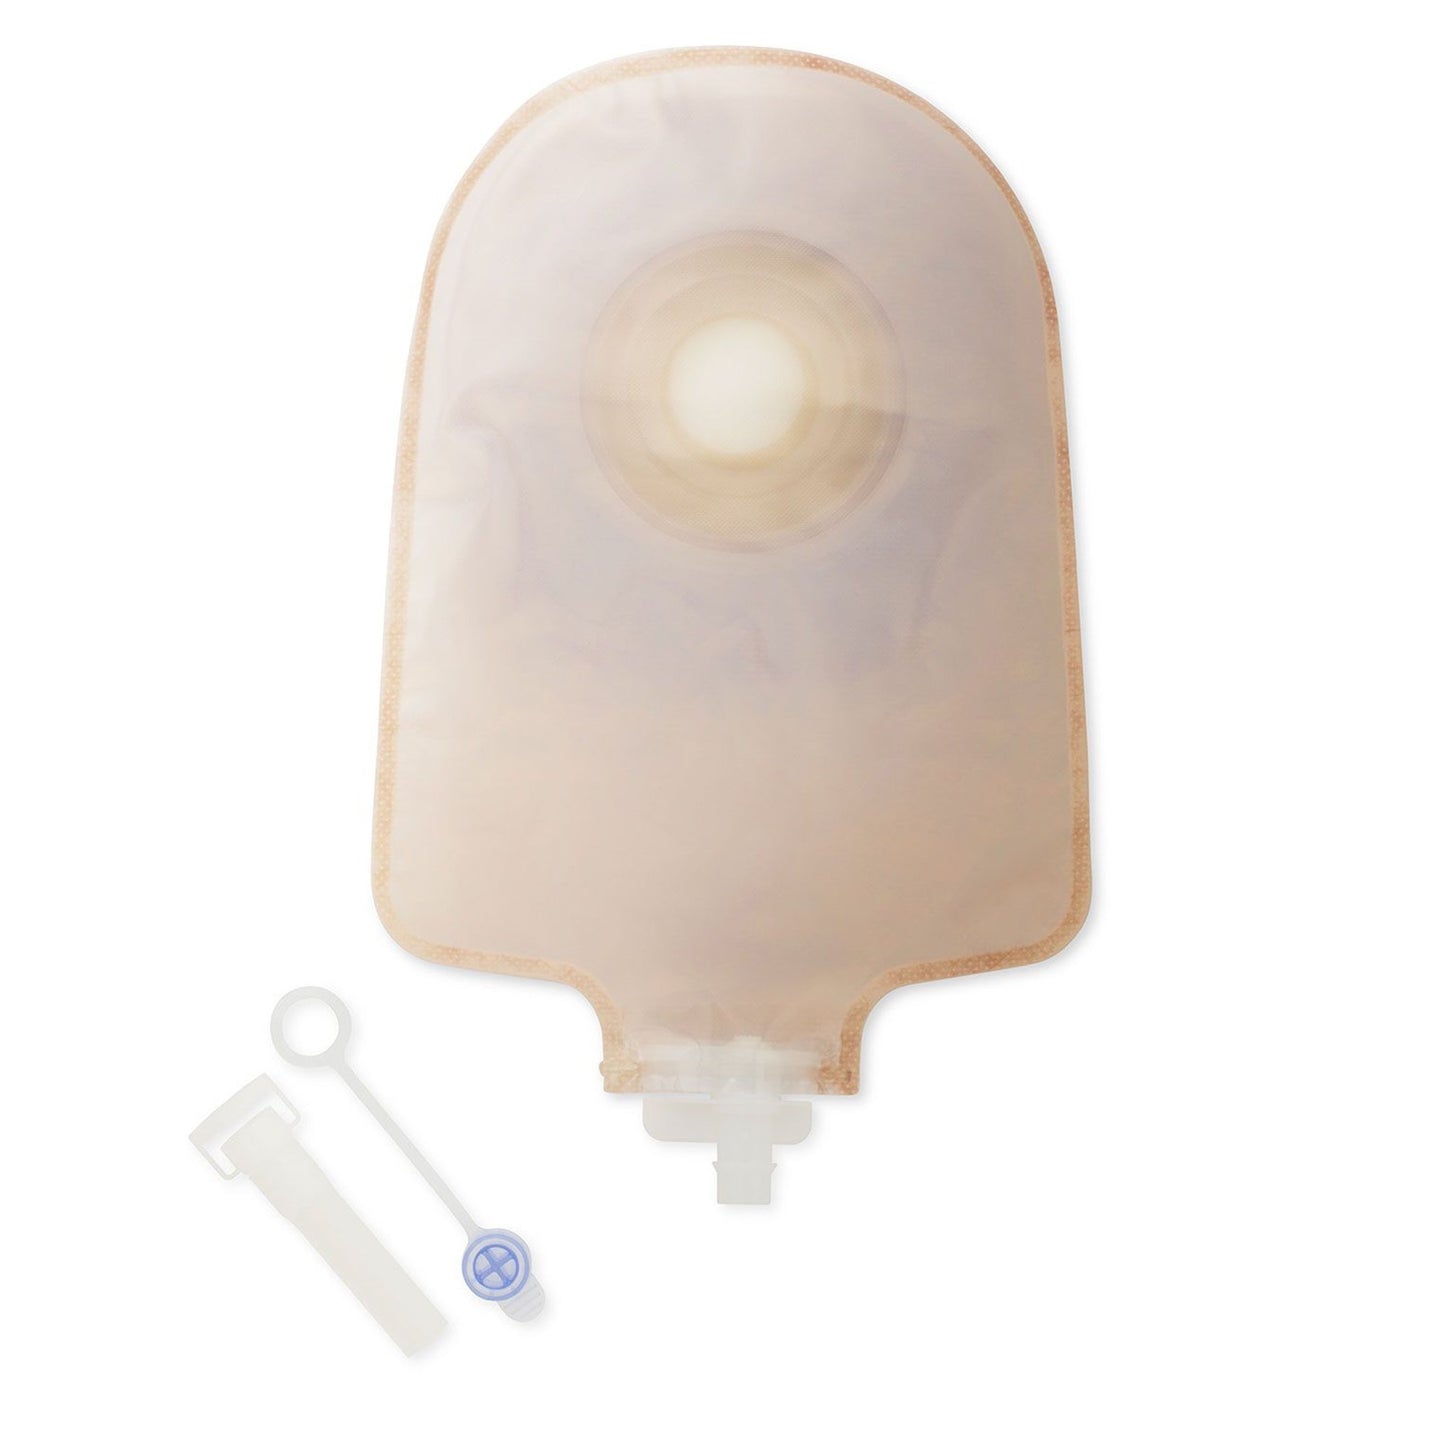 Premier™ One-Piece Drainable Transparent Urostomy Pouch, 9 Inch Length, 3/4 Inch Stoma, 5 ct